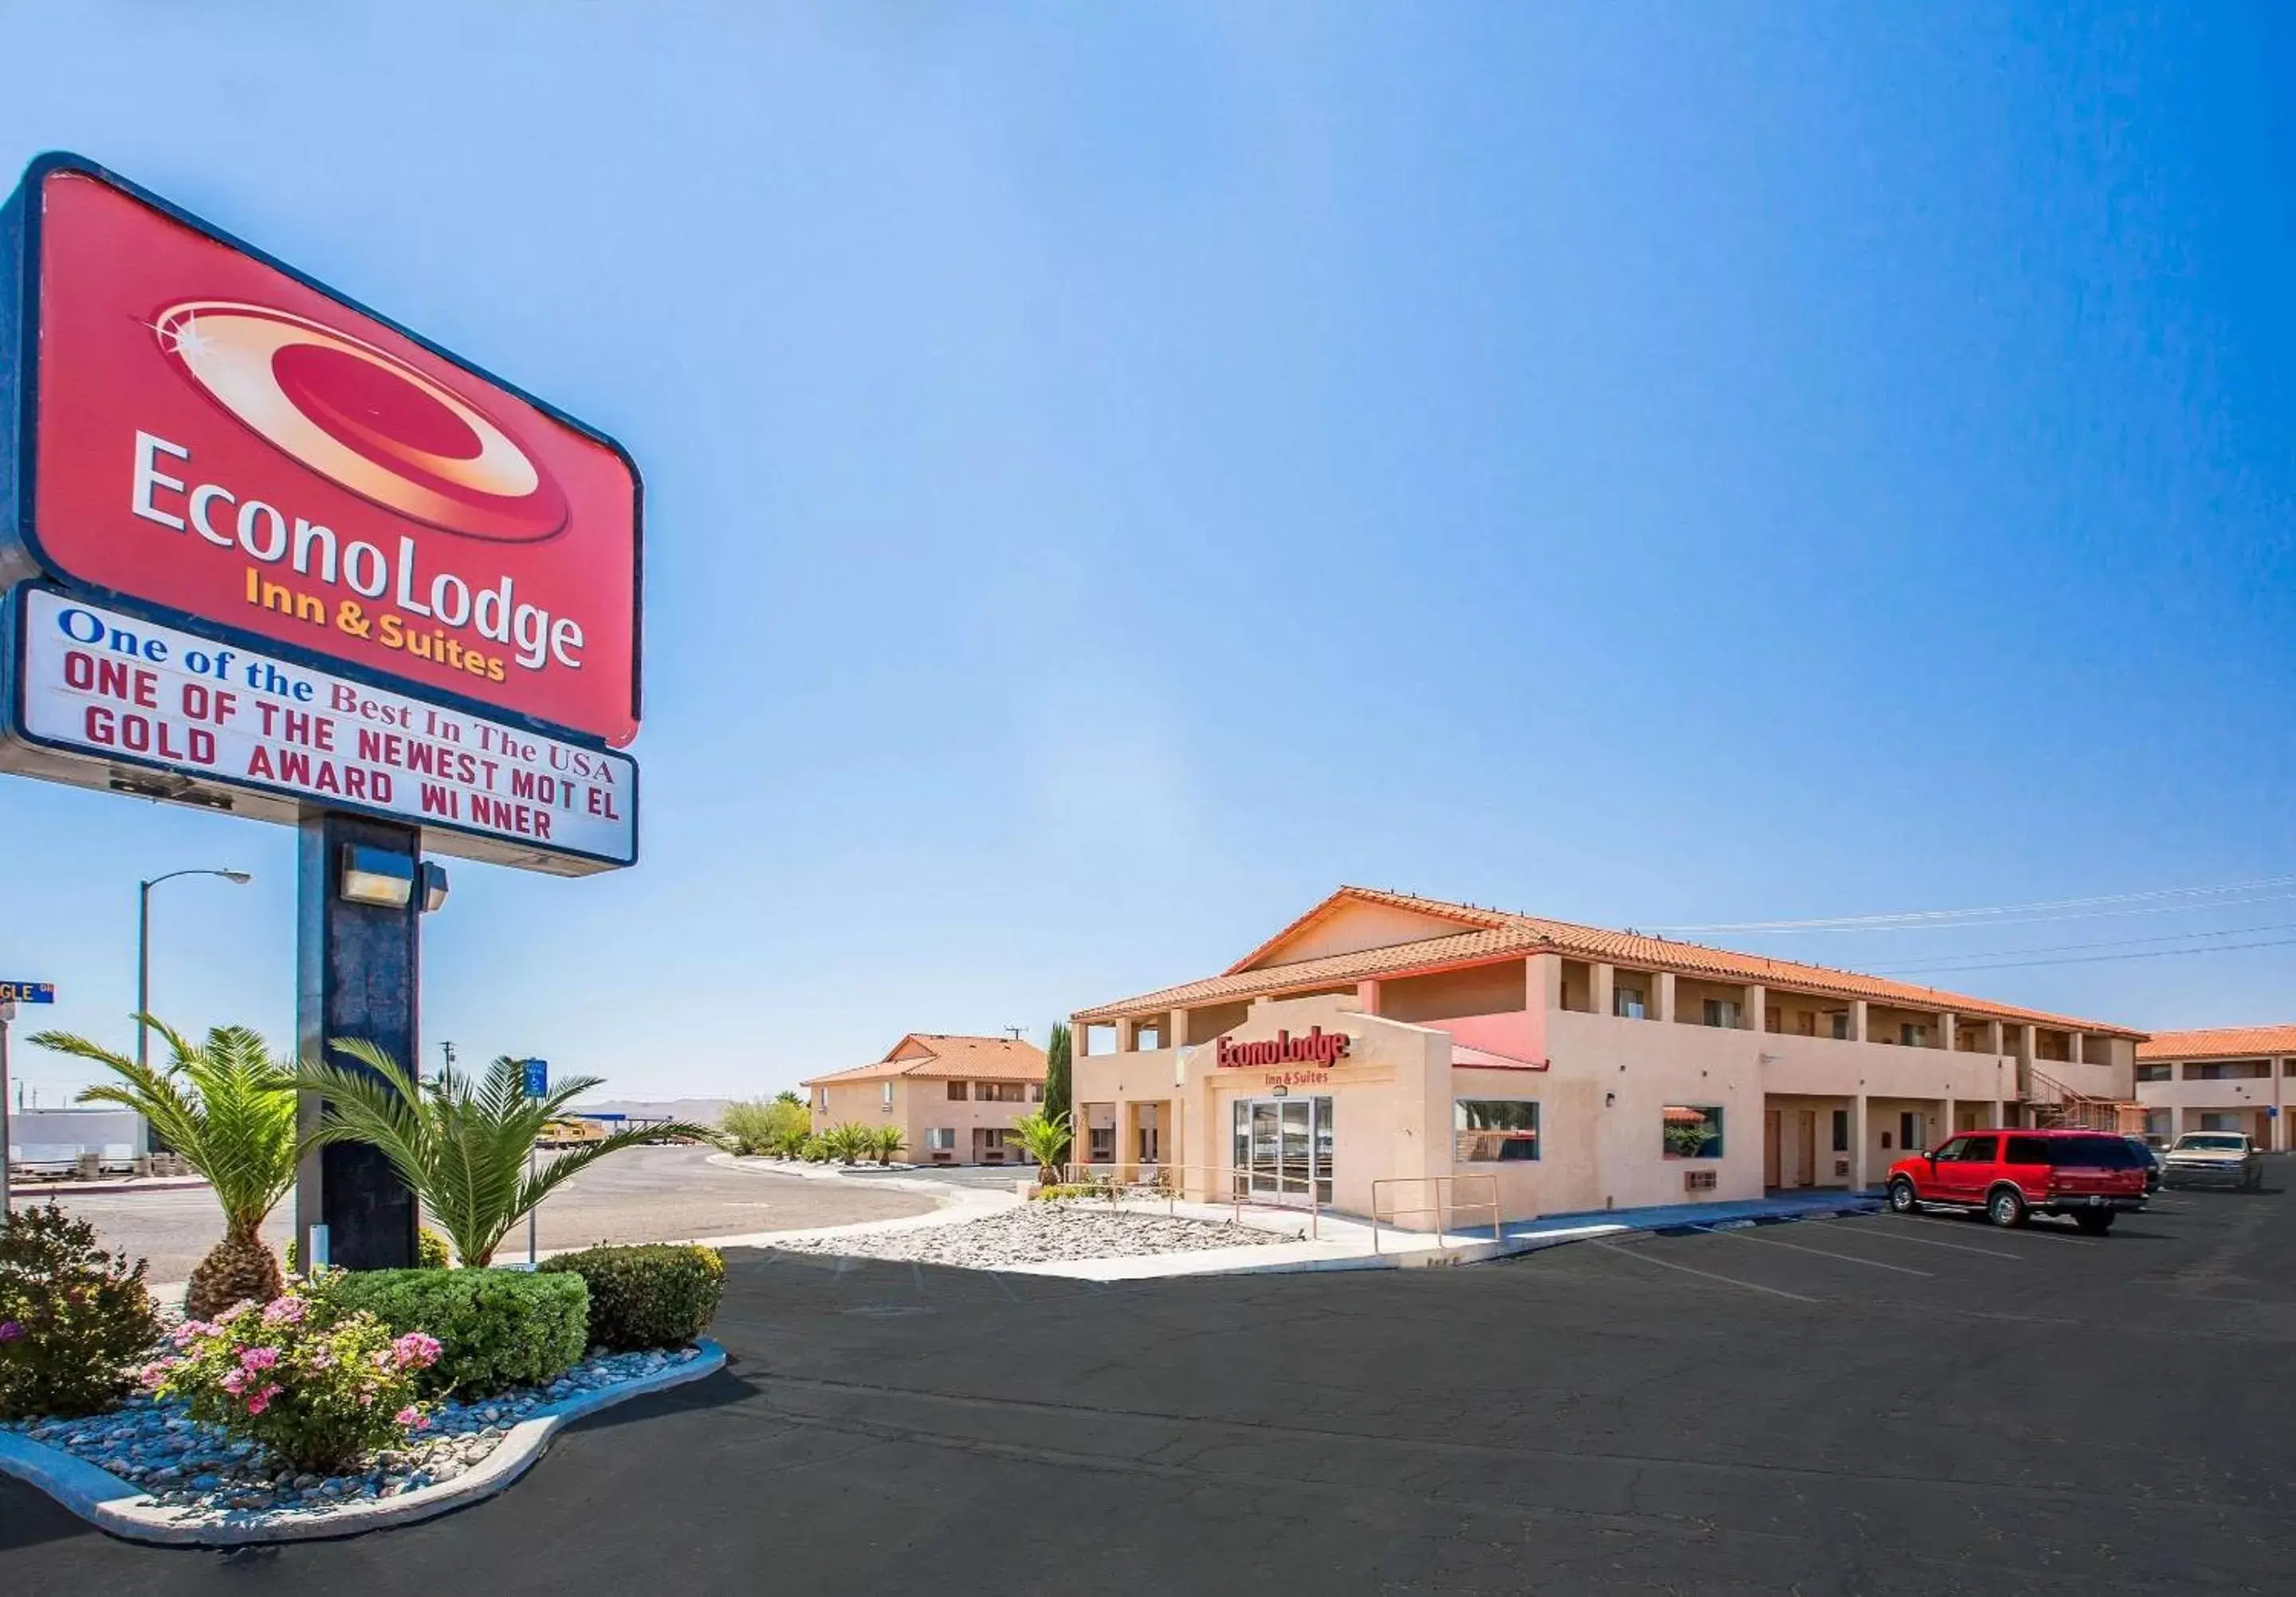 Property Building in Econo Lodge Inn & Suites near China Lake Naval Station